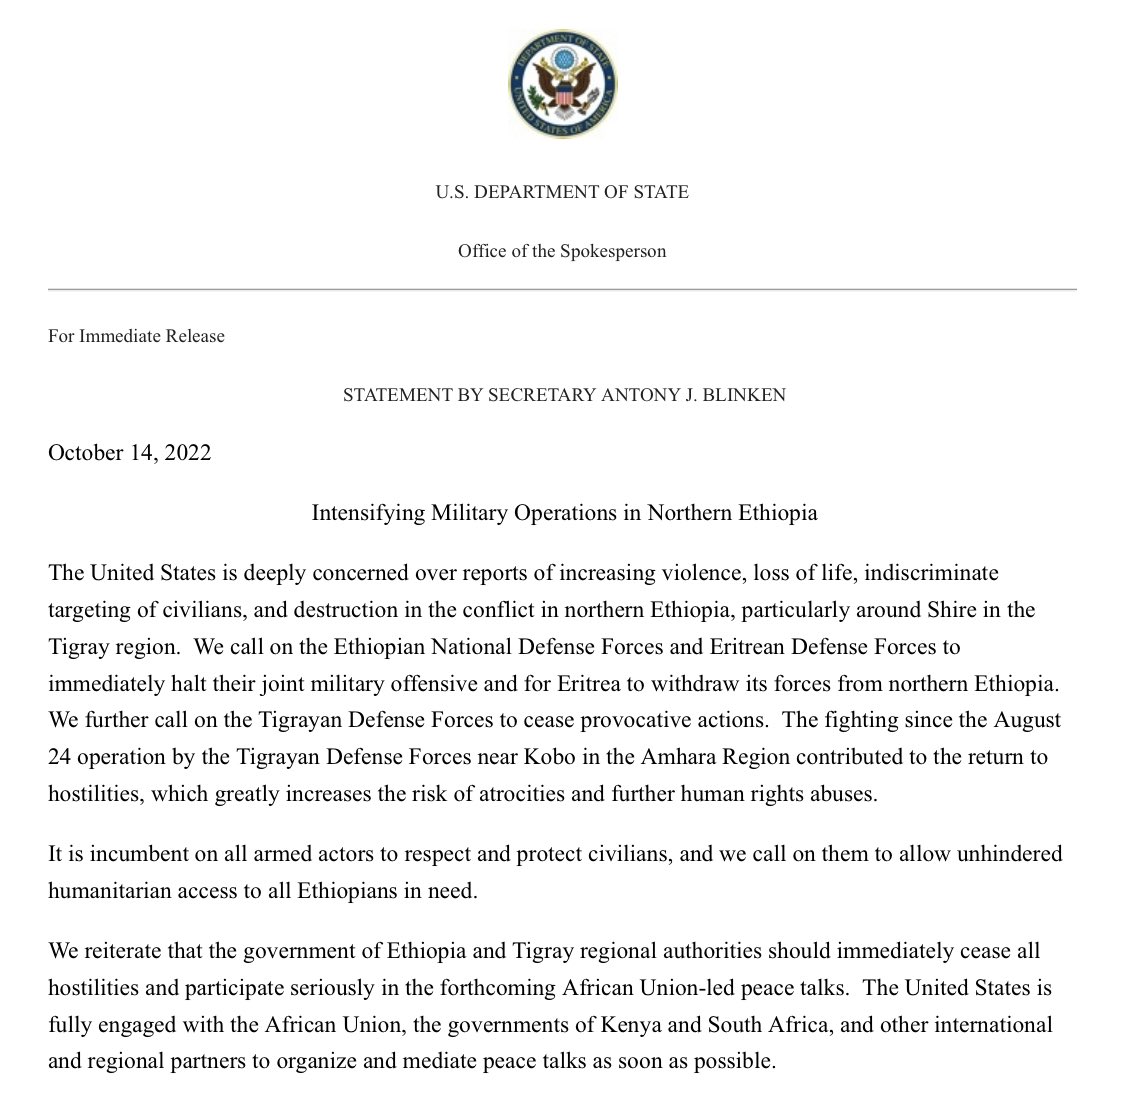 US deeply concerned over reports of increasing violence, loss of life, indiscriminate targeting of civilians, and destruction in the conflict in northern Ethiopia, particularly around Shire in the Tigray region, says @SecBlinken in a statement